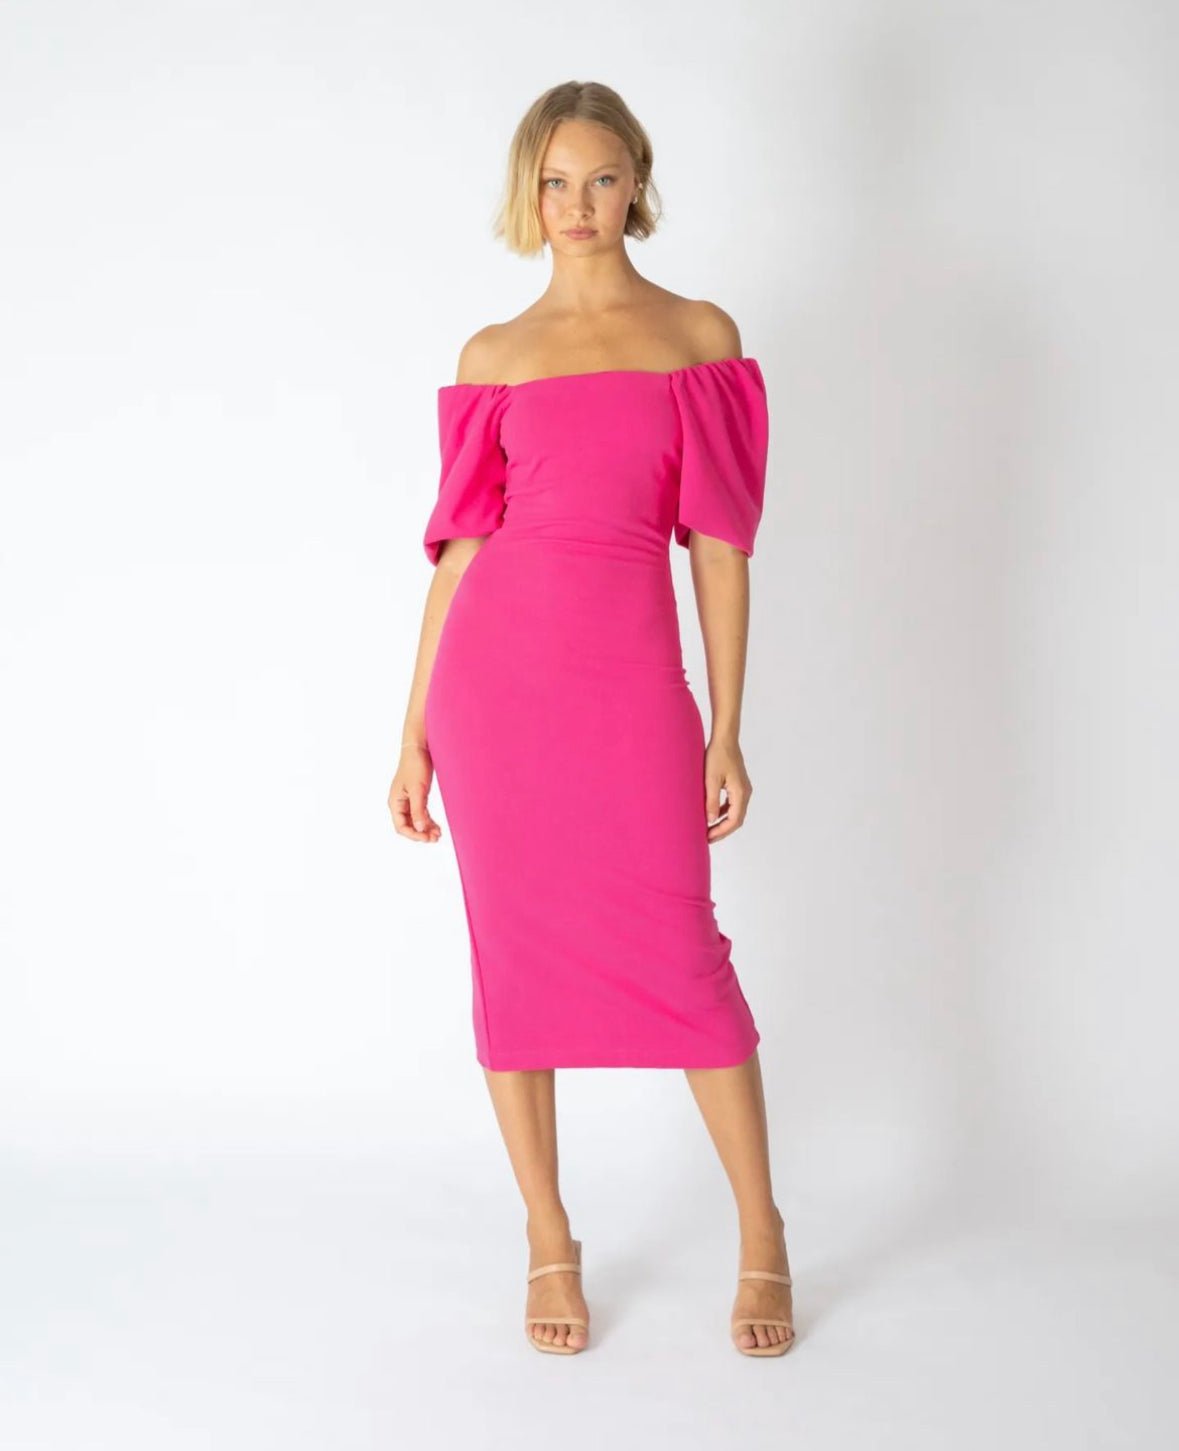 Ivy Dress (Pink) - Something For Me​​